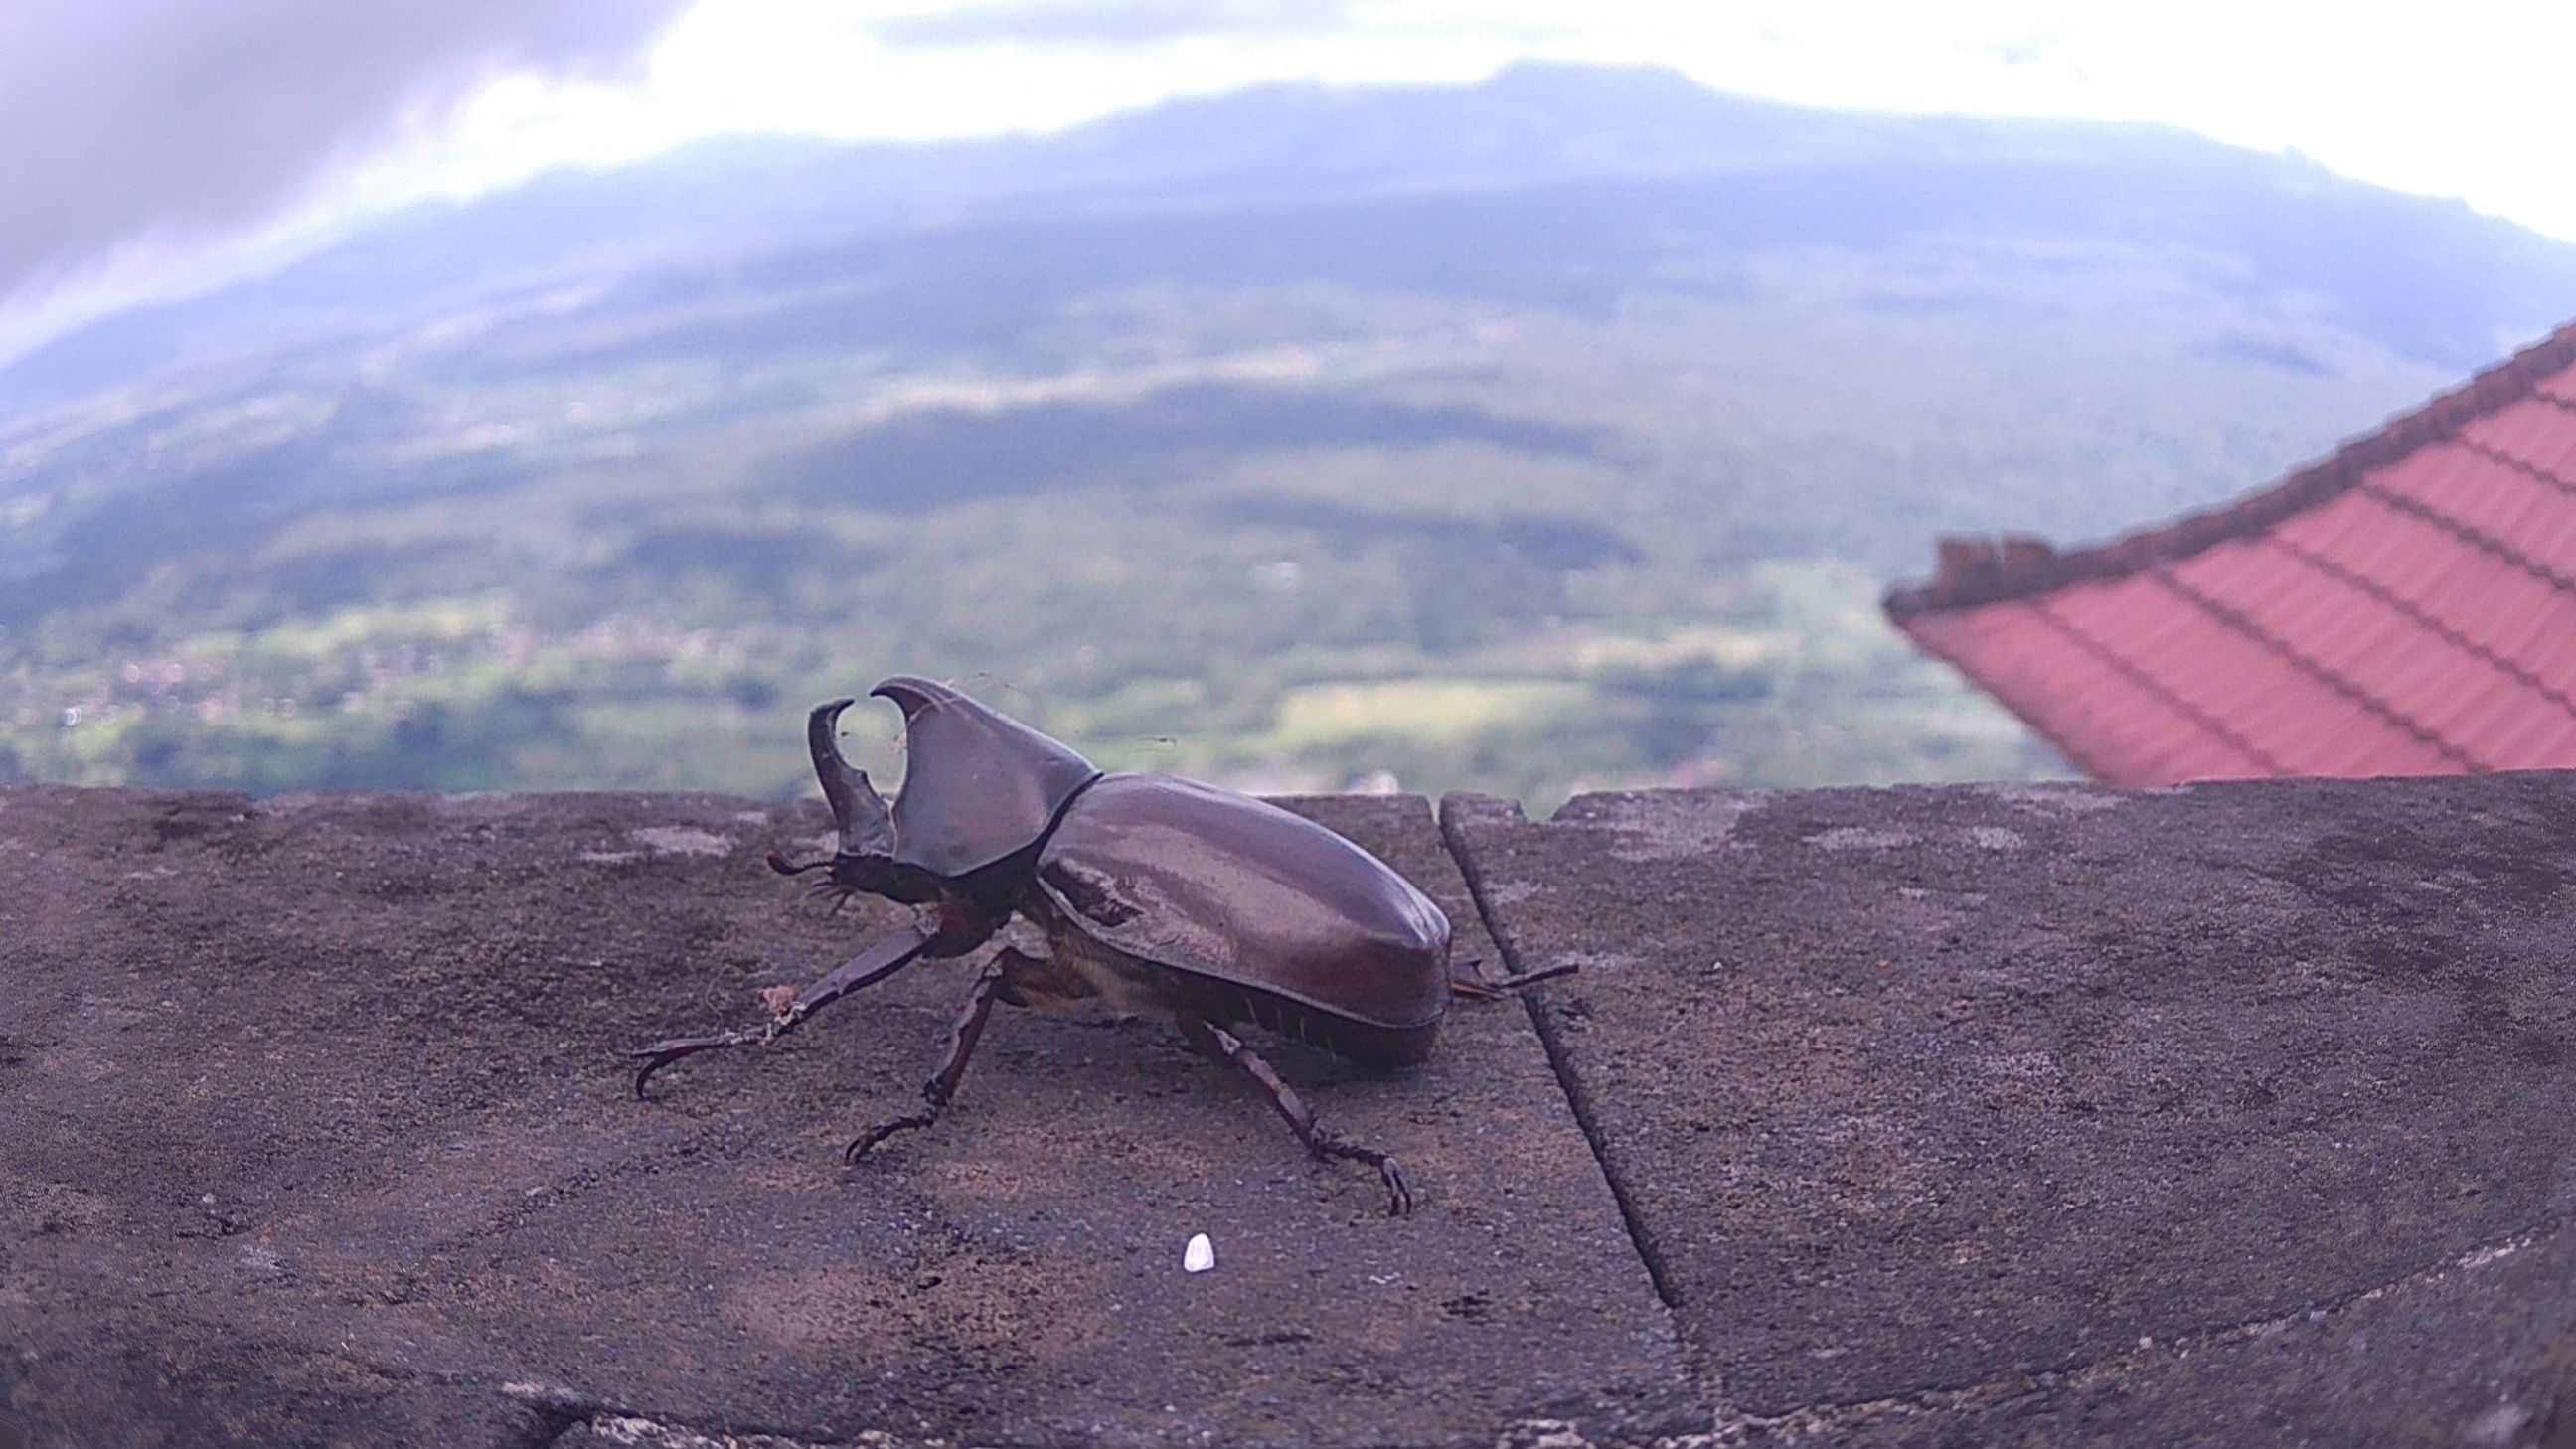 Wild bug from the top